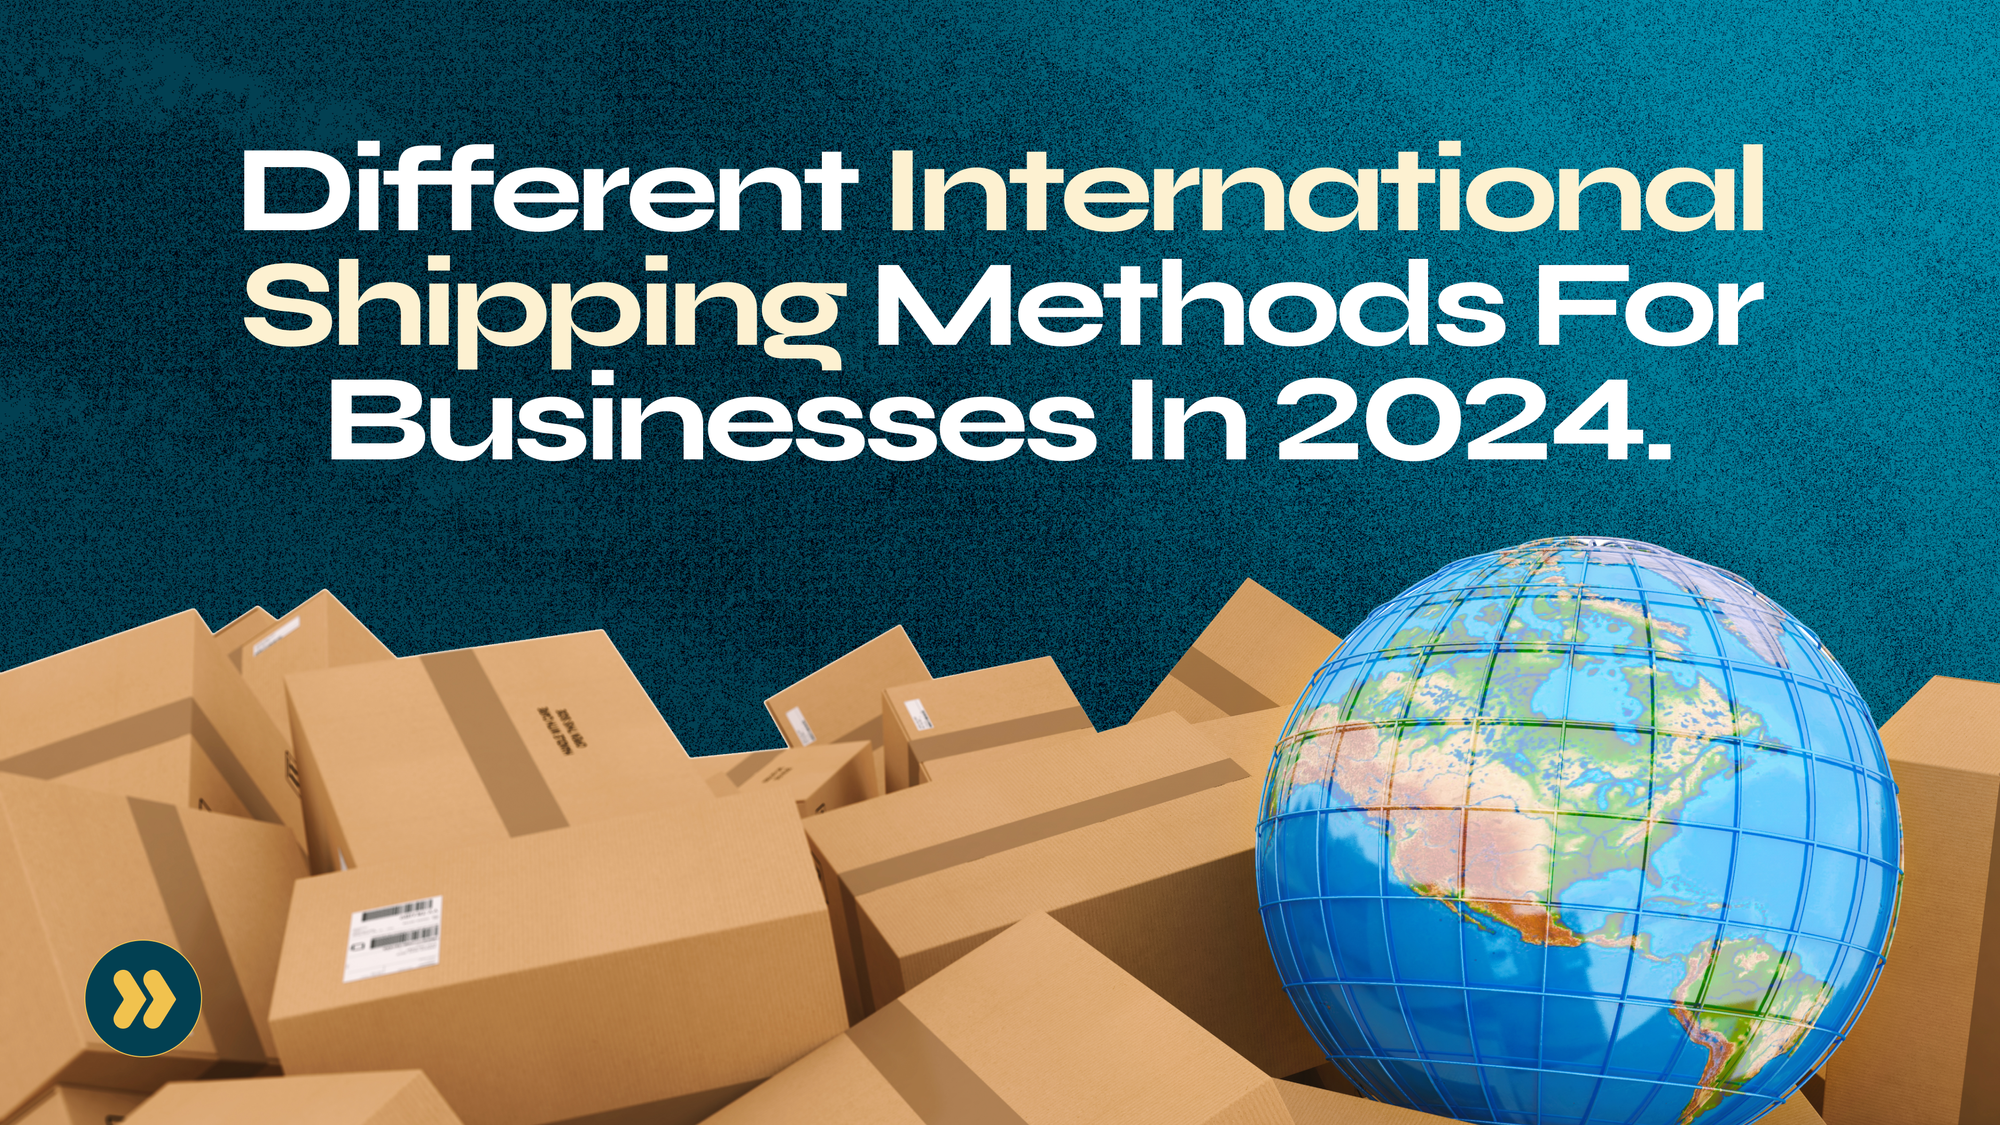 Different International Shipping Methods for Businesses in 2024